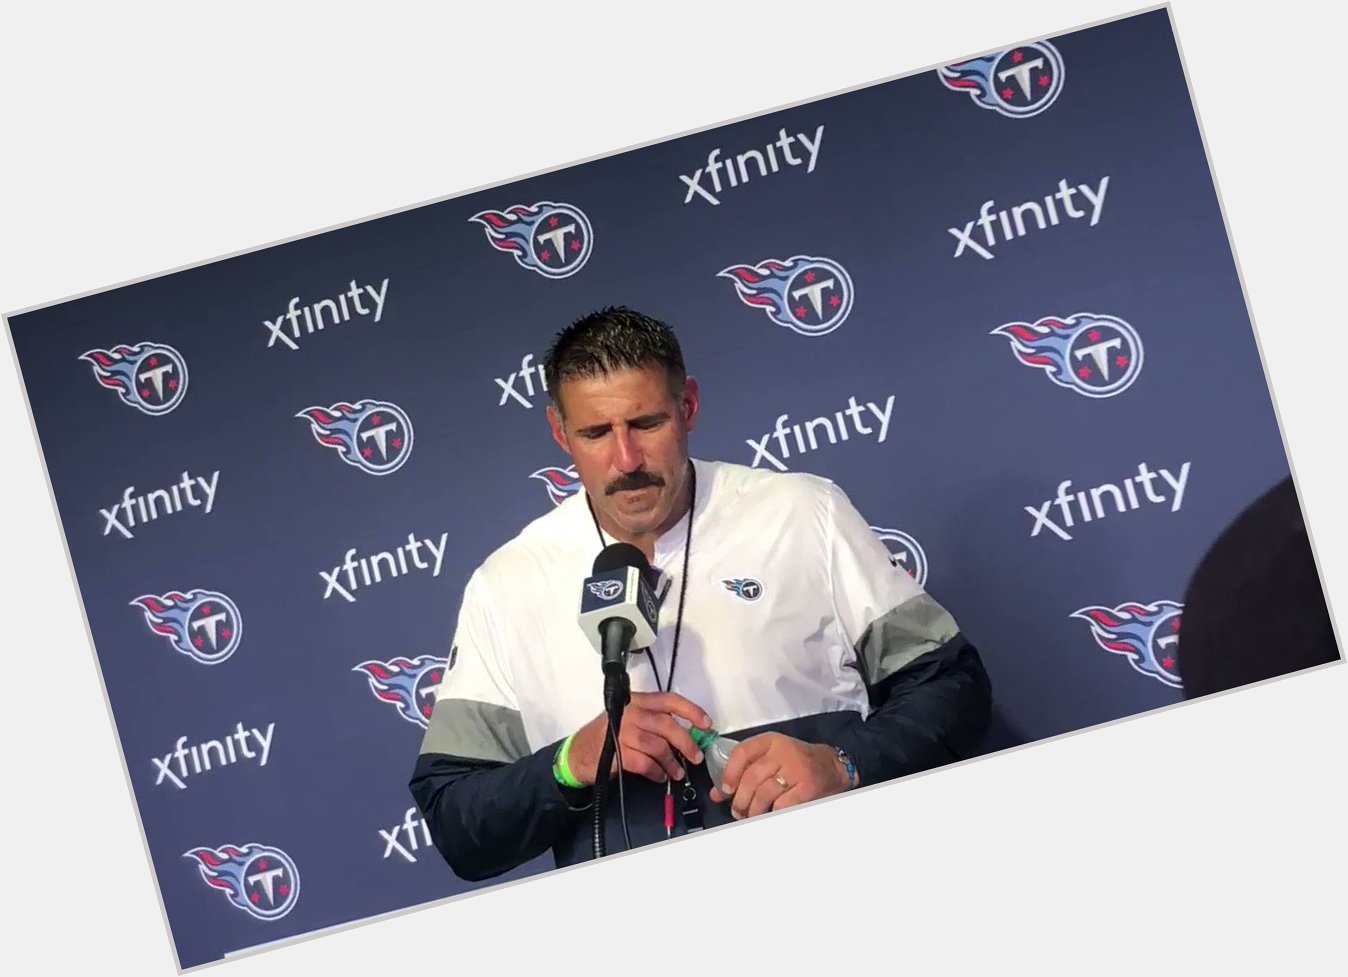 Mike Vrabel enjoyed the Happy Birthday prank & talking trash again with 